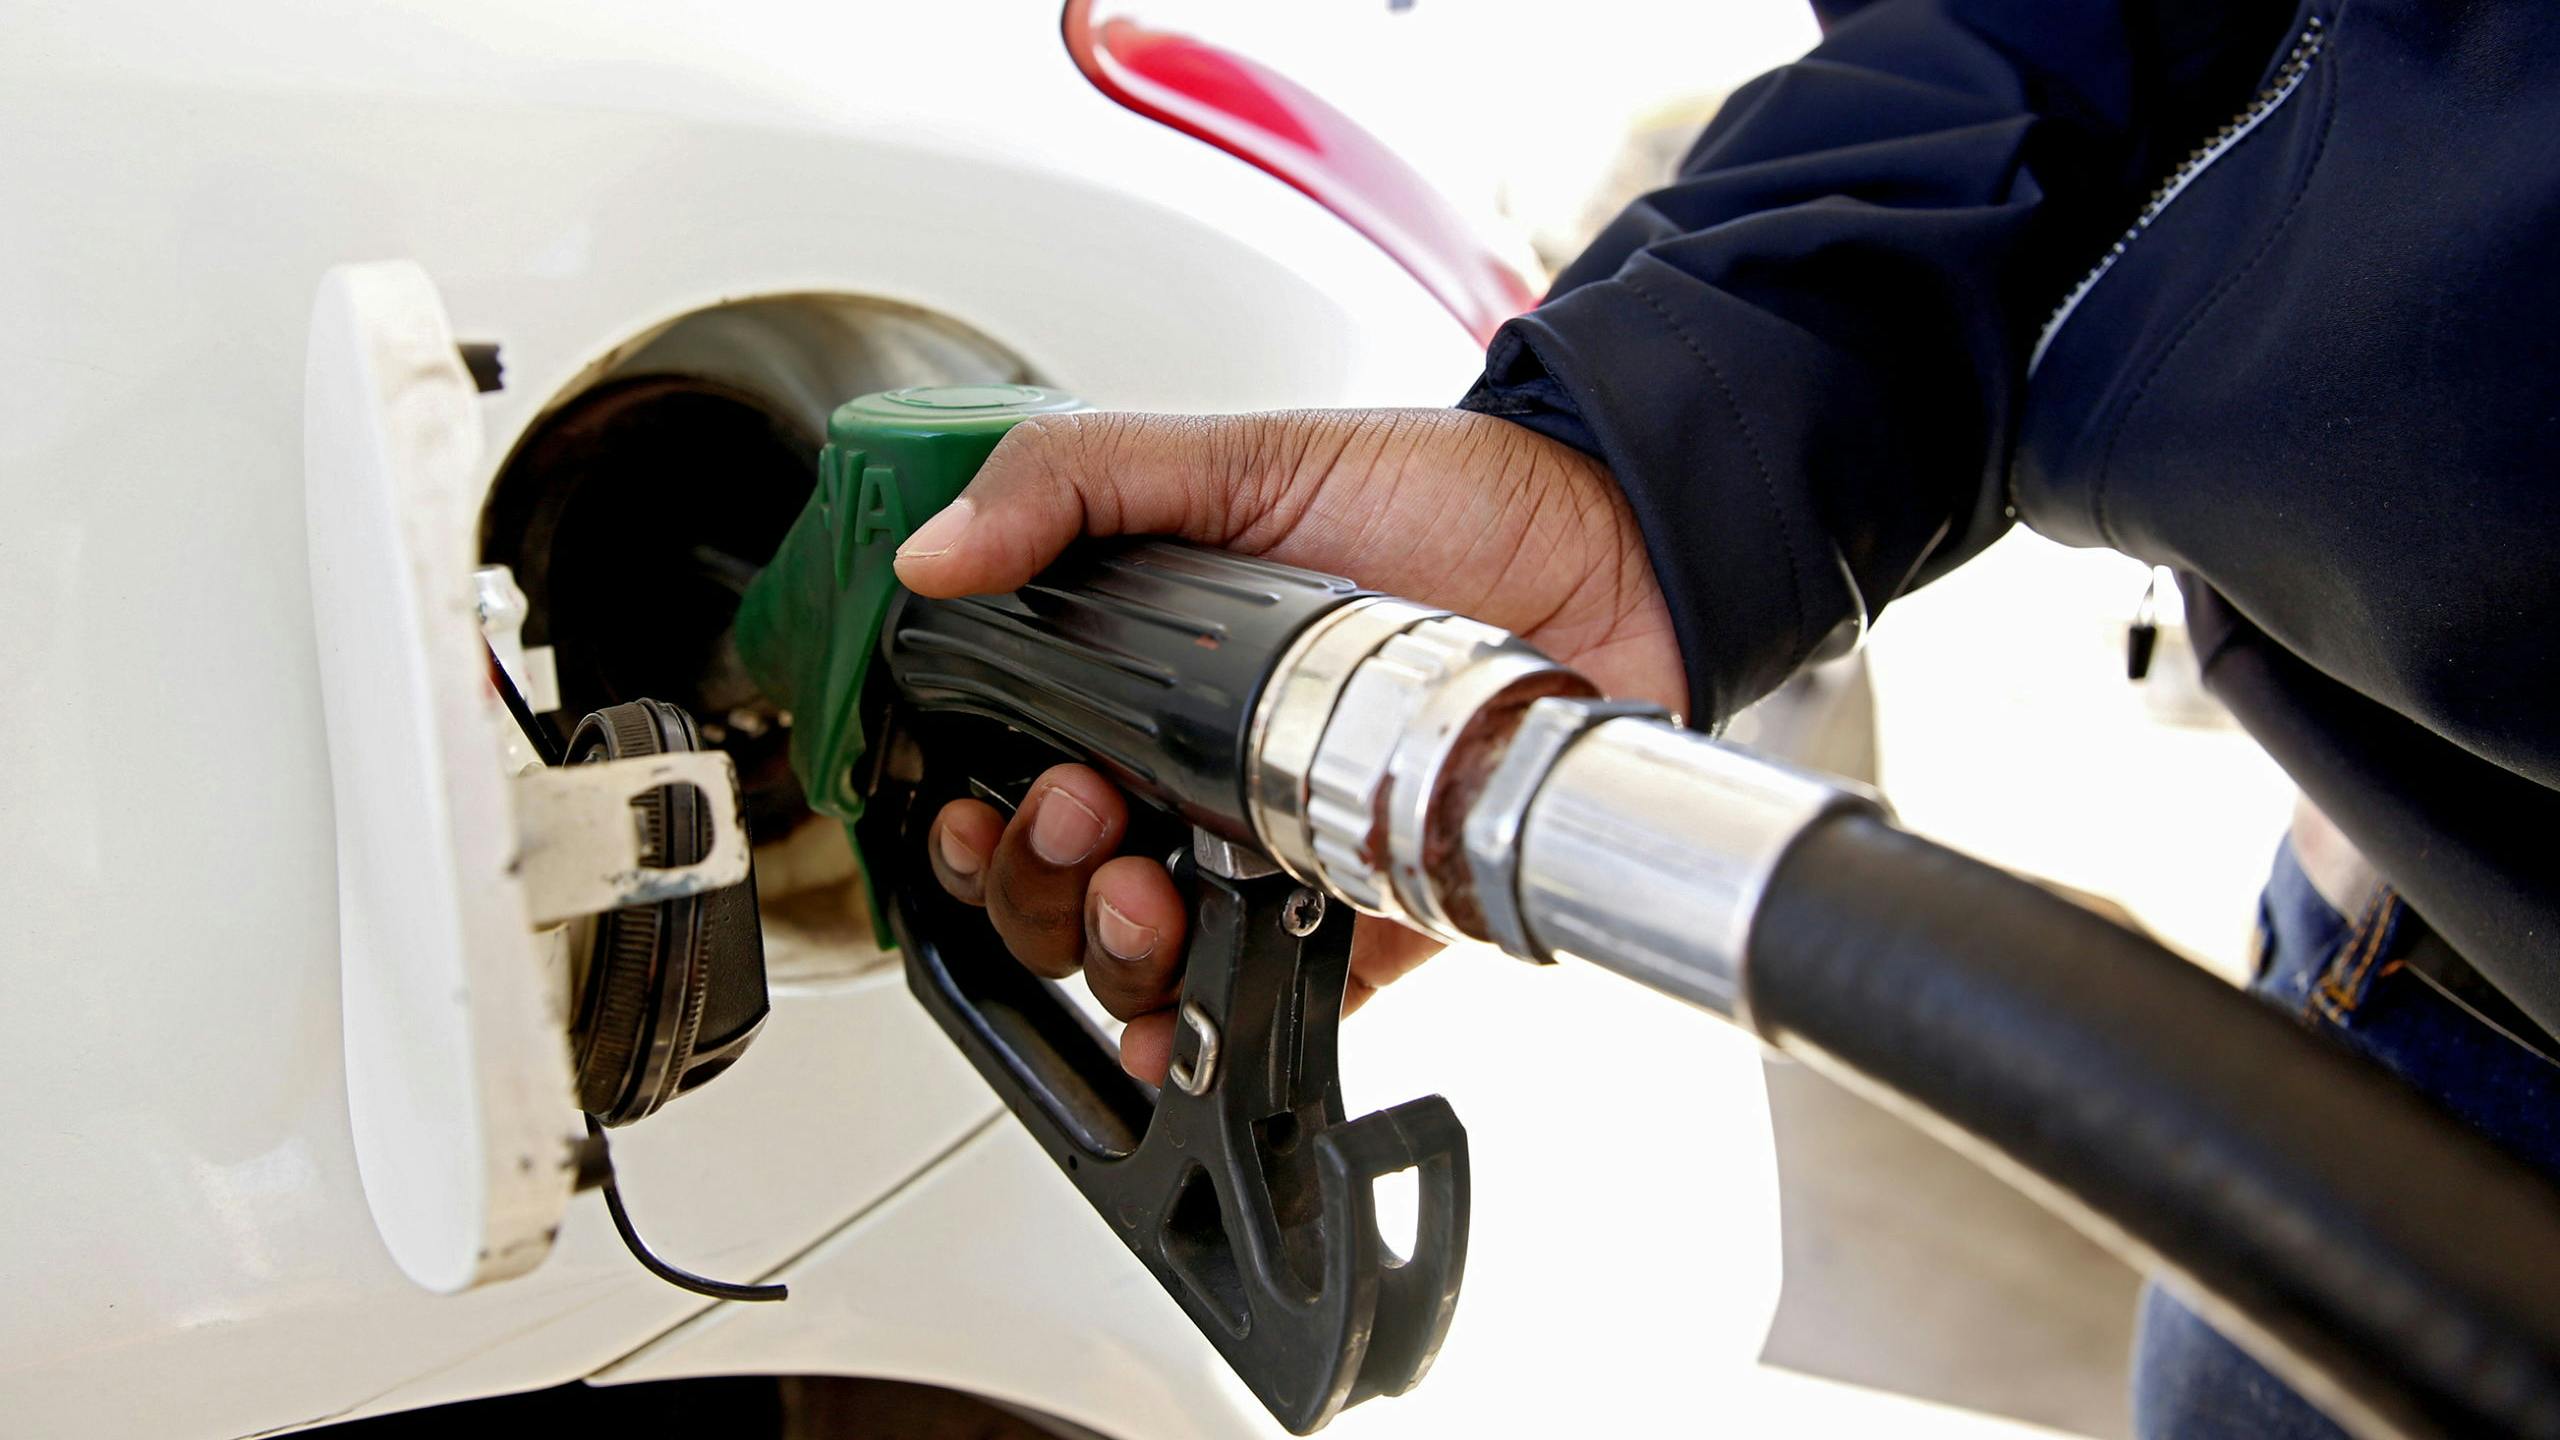 2019-06-12 10:51:03 epa07643596 A customer fuels up his vehicle at a service station in Harare, Zimbabwe, 12 June 2019. Zimbabwe Energy Regulatory Authority (Zera) has marginally increased the price of petrol and diesel respectively, with immediate effect as the local currency continues to plunge against the United States dollar.The retail price of blend petrol is now 5.26 Zimbabwean dollars per liter, up from ZWL 4.97 and diesel will sell at ZWL 5.07 from ZWL 4.89 per Liter The price for ethanol is now ZWL 4.60 per litre. This is the third fuel increase in six months.  EPA/AARON UFUMELI